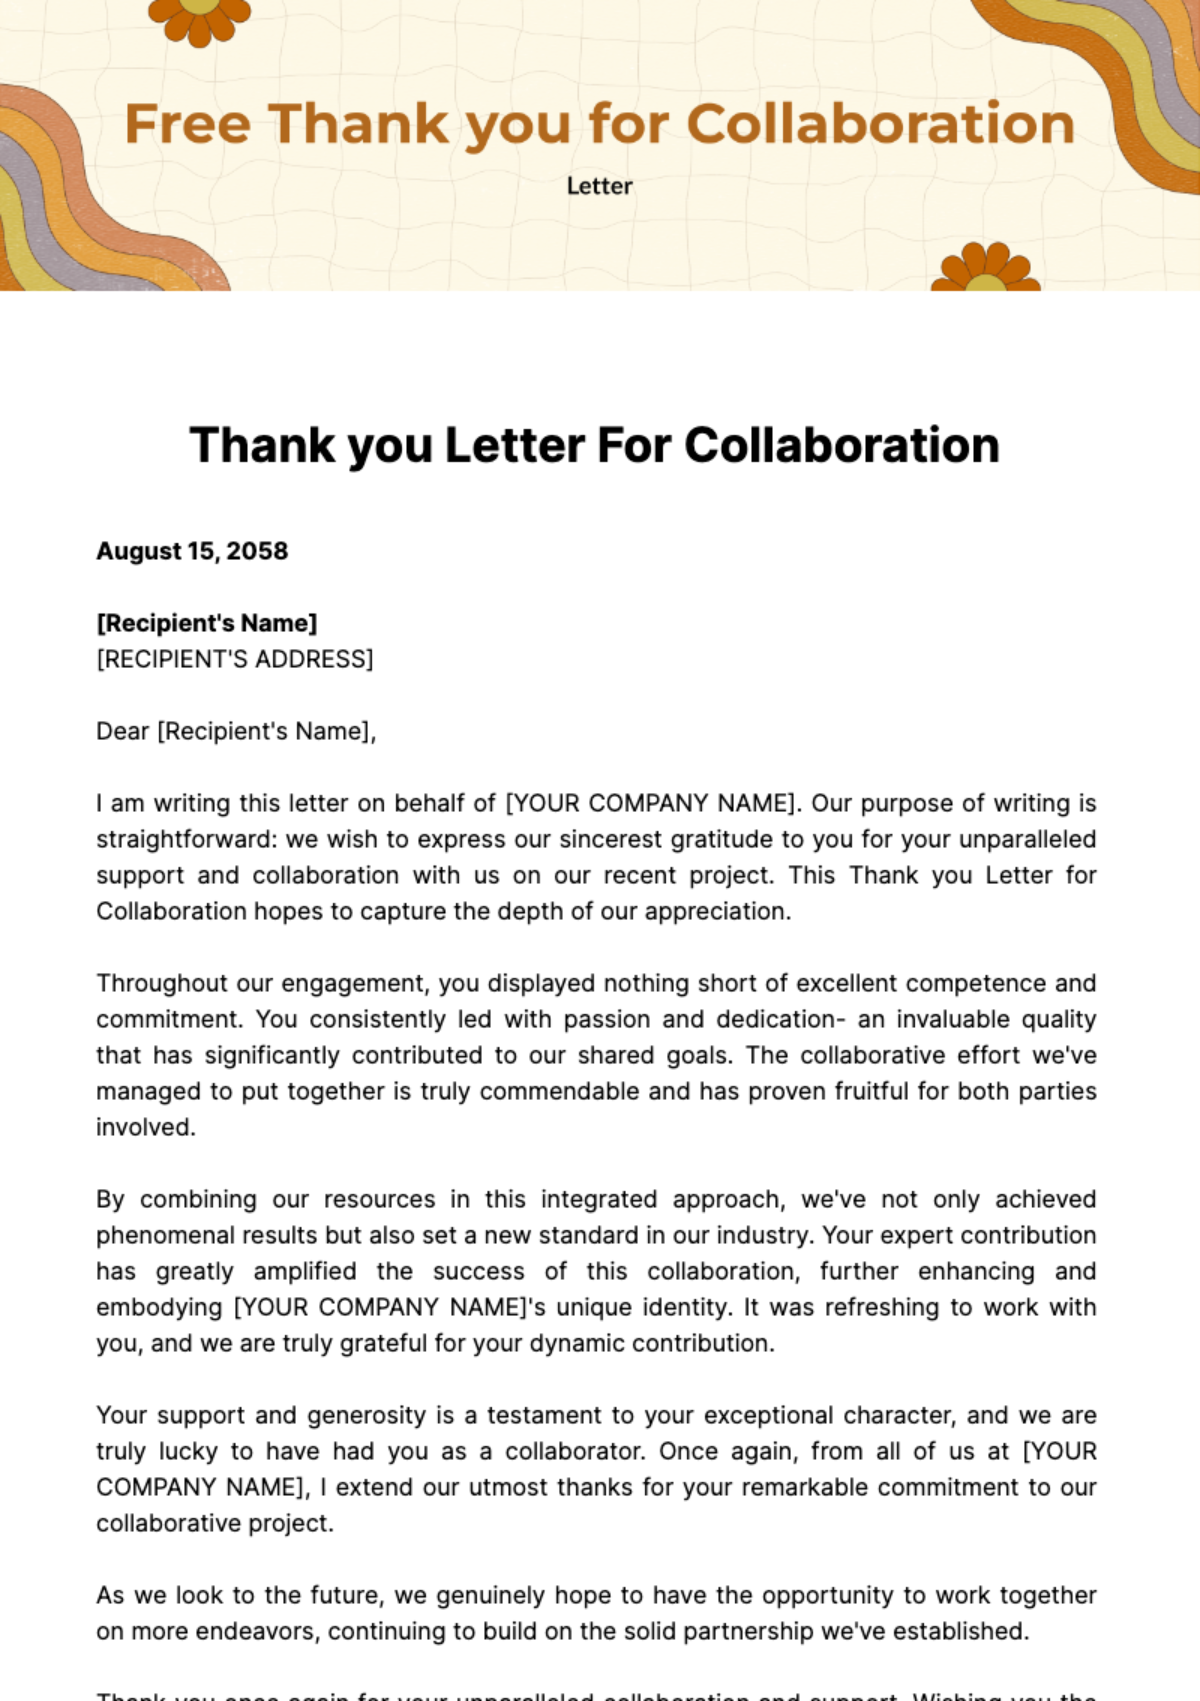 Free Thank you Letter for Collaboration Template